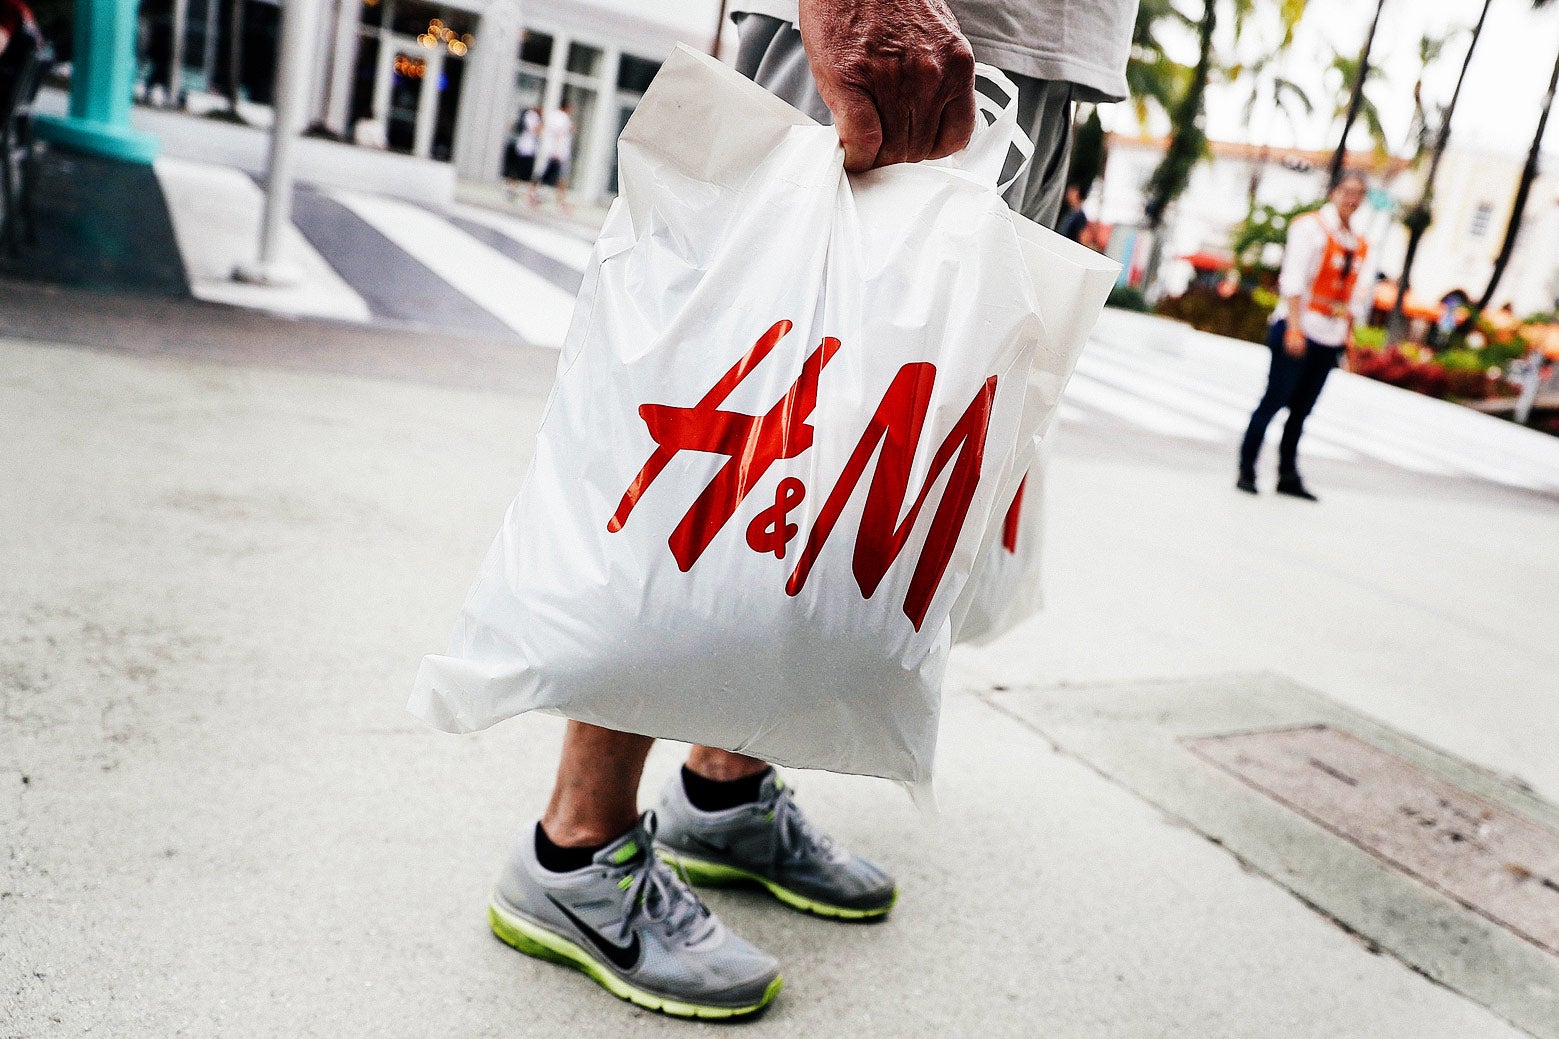 A plastic bag with the H&M logo on it, held by a man in shorts and sneakers outside a store in Miami.